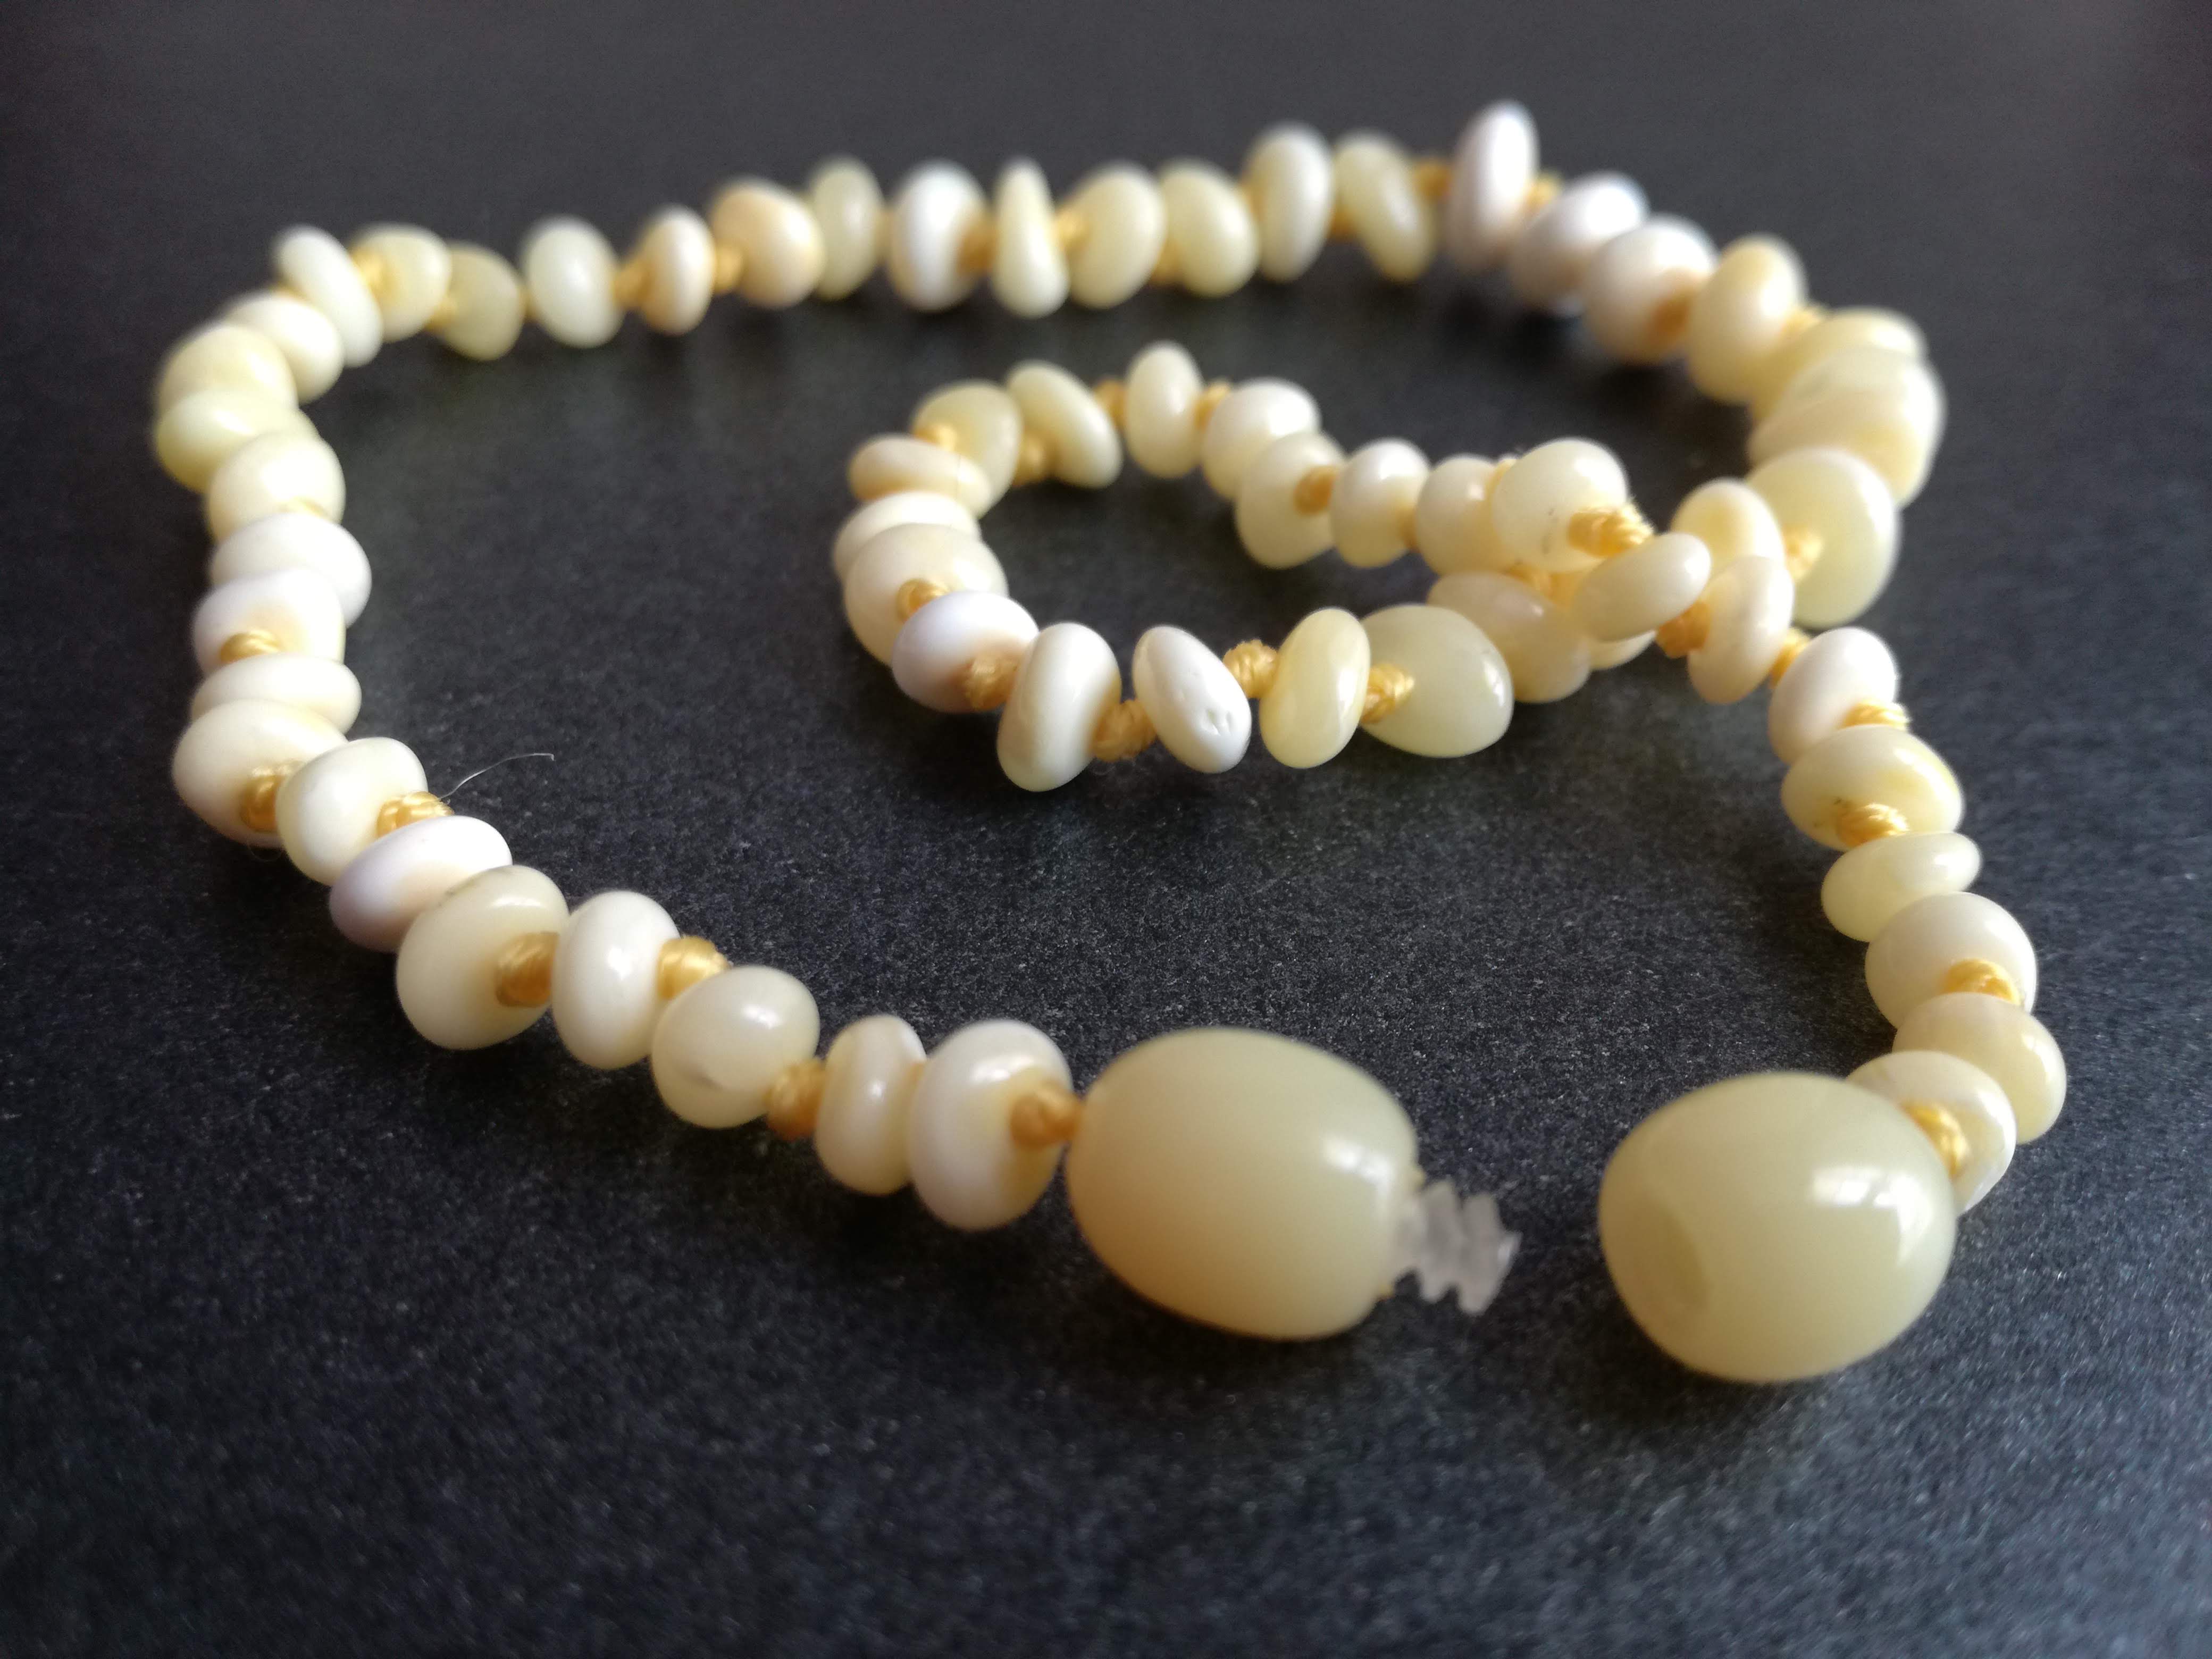 Baltic amber teething necklace, white and milky polished beads, premium product, limited edition, plastic screw clasp zoom, healing, succinic acid, genuine baltic amber, safe for babies and nursing mums, made in poland